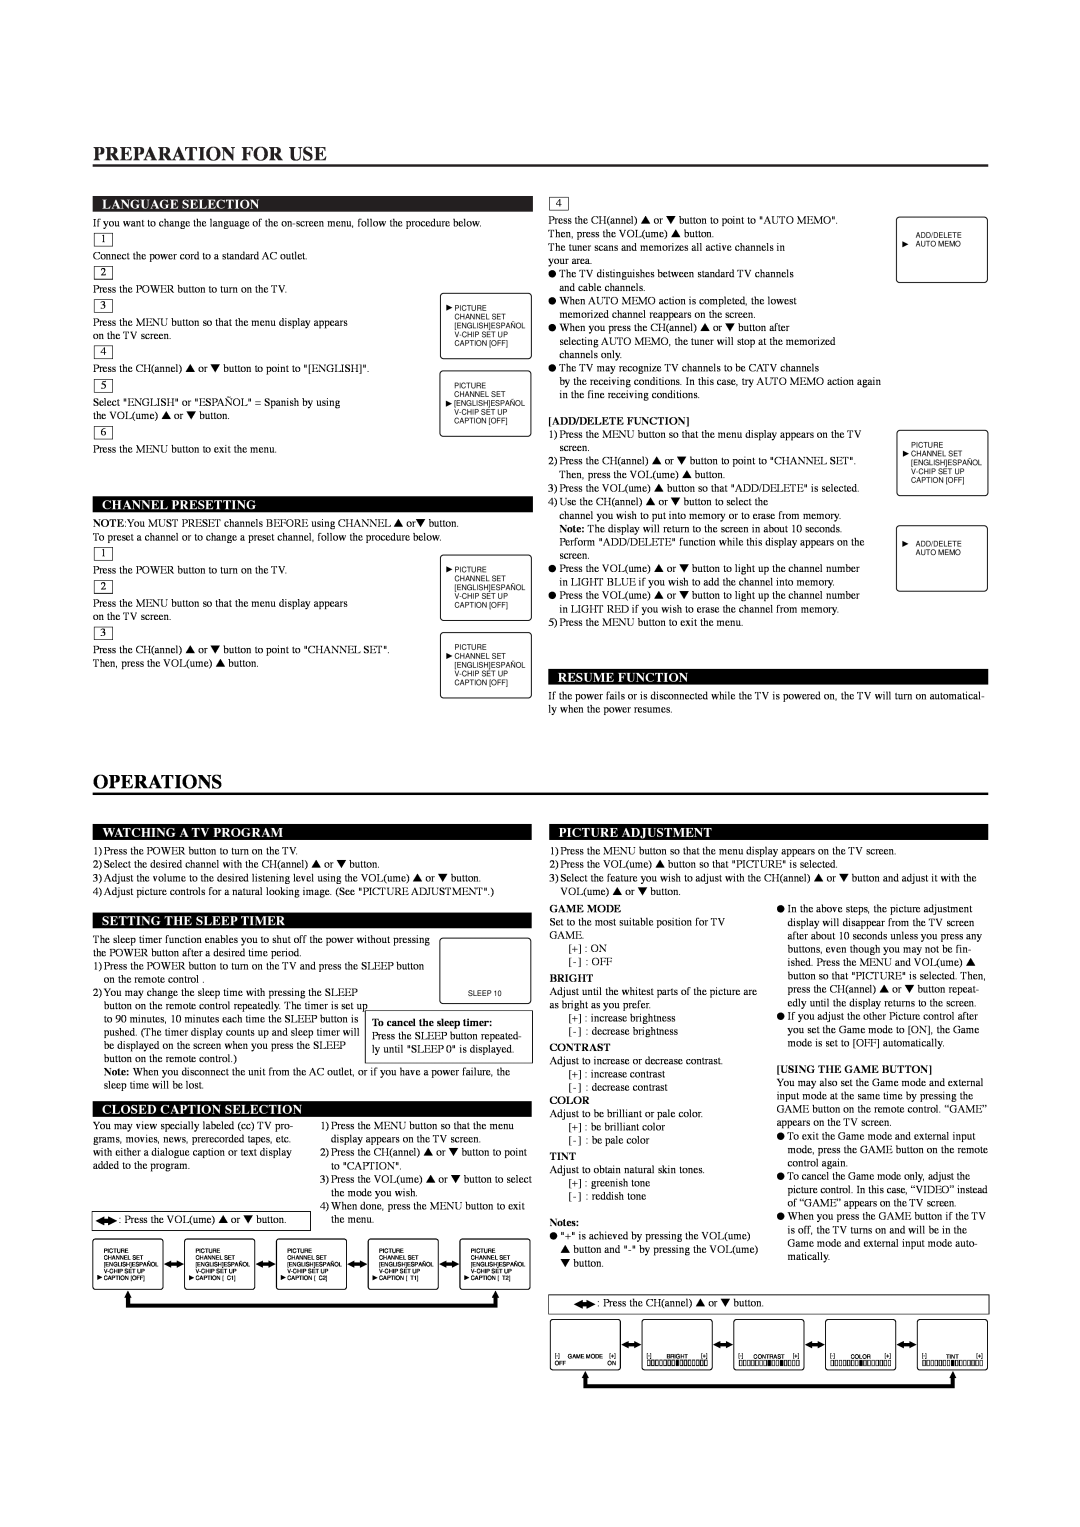 Sylvania 6413TC, 6419TC Preparation For Use, Operations, Language Selection, Channel Presetting, Resume Function 